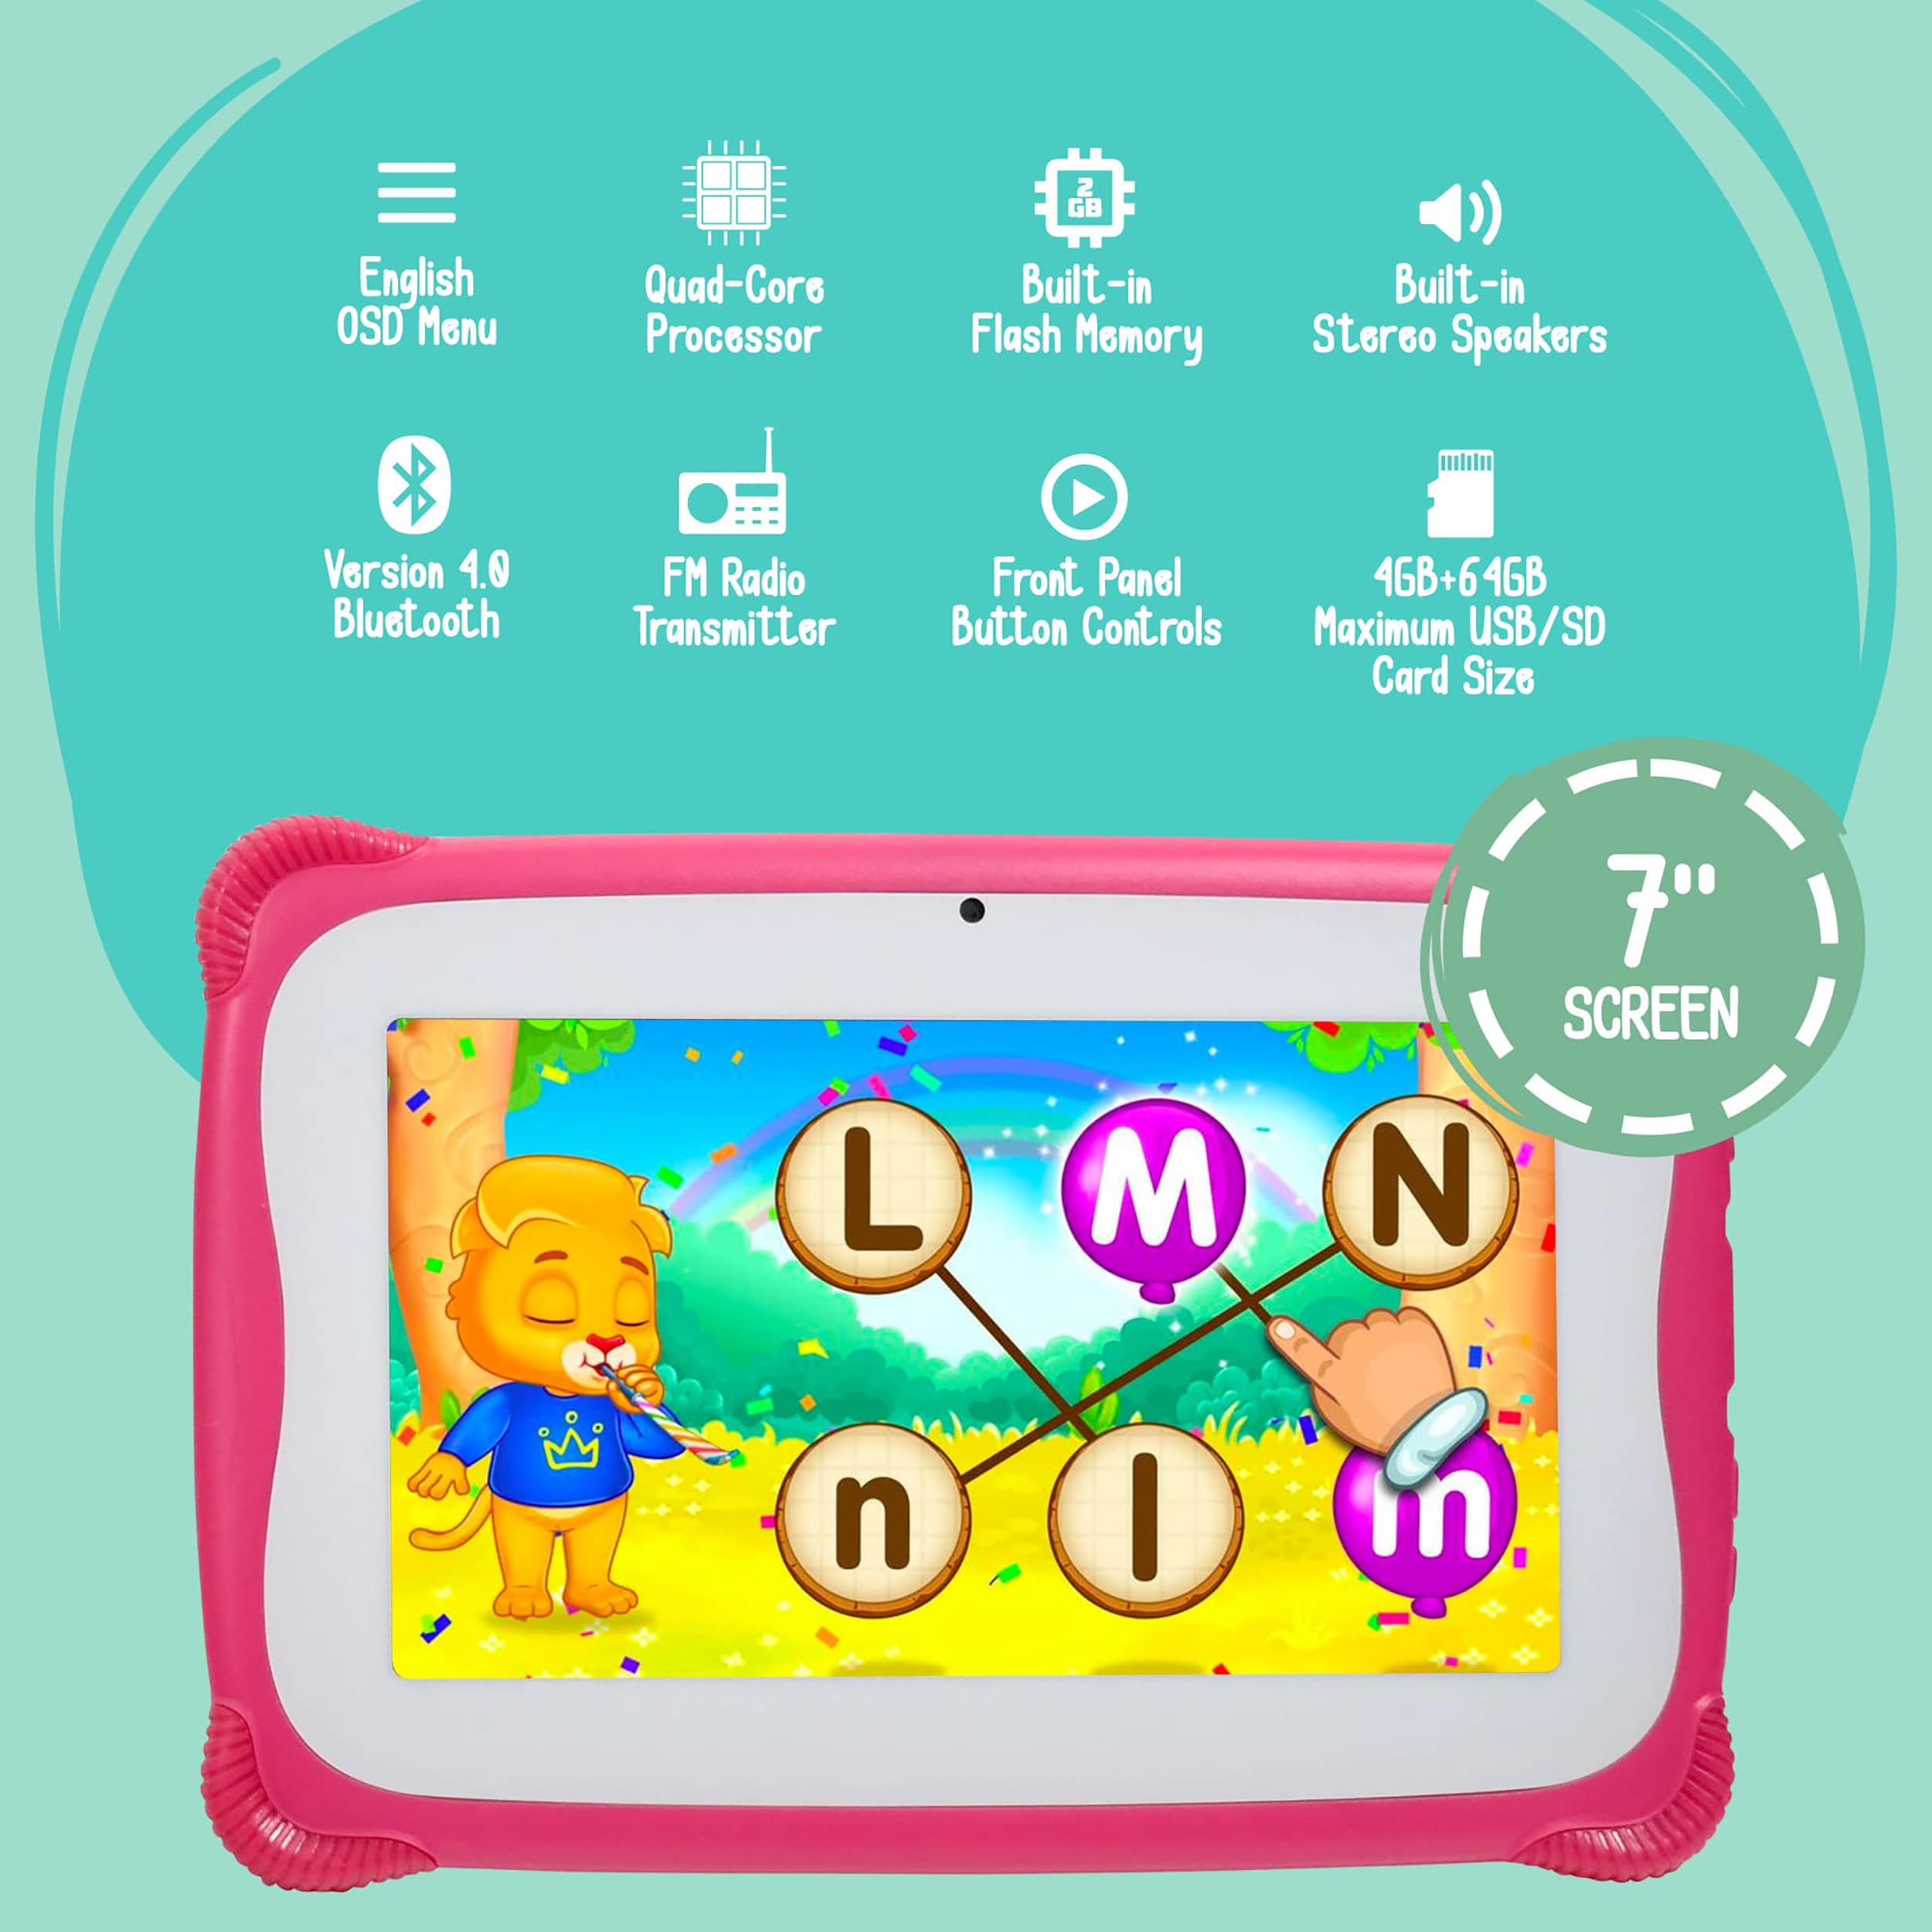 ﻿Kids Tablet W/Stylus Pen 7Inch WiFi Android 10 Children Tablet 1GB RAM 8GB Storage Quad-Core 2800 mAH Parental Control Educational Learning Games Dual Camera YouTube Toddler/Kid Proof Case (Hot Pink)